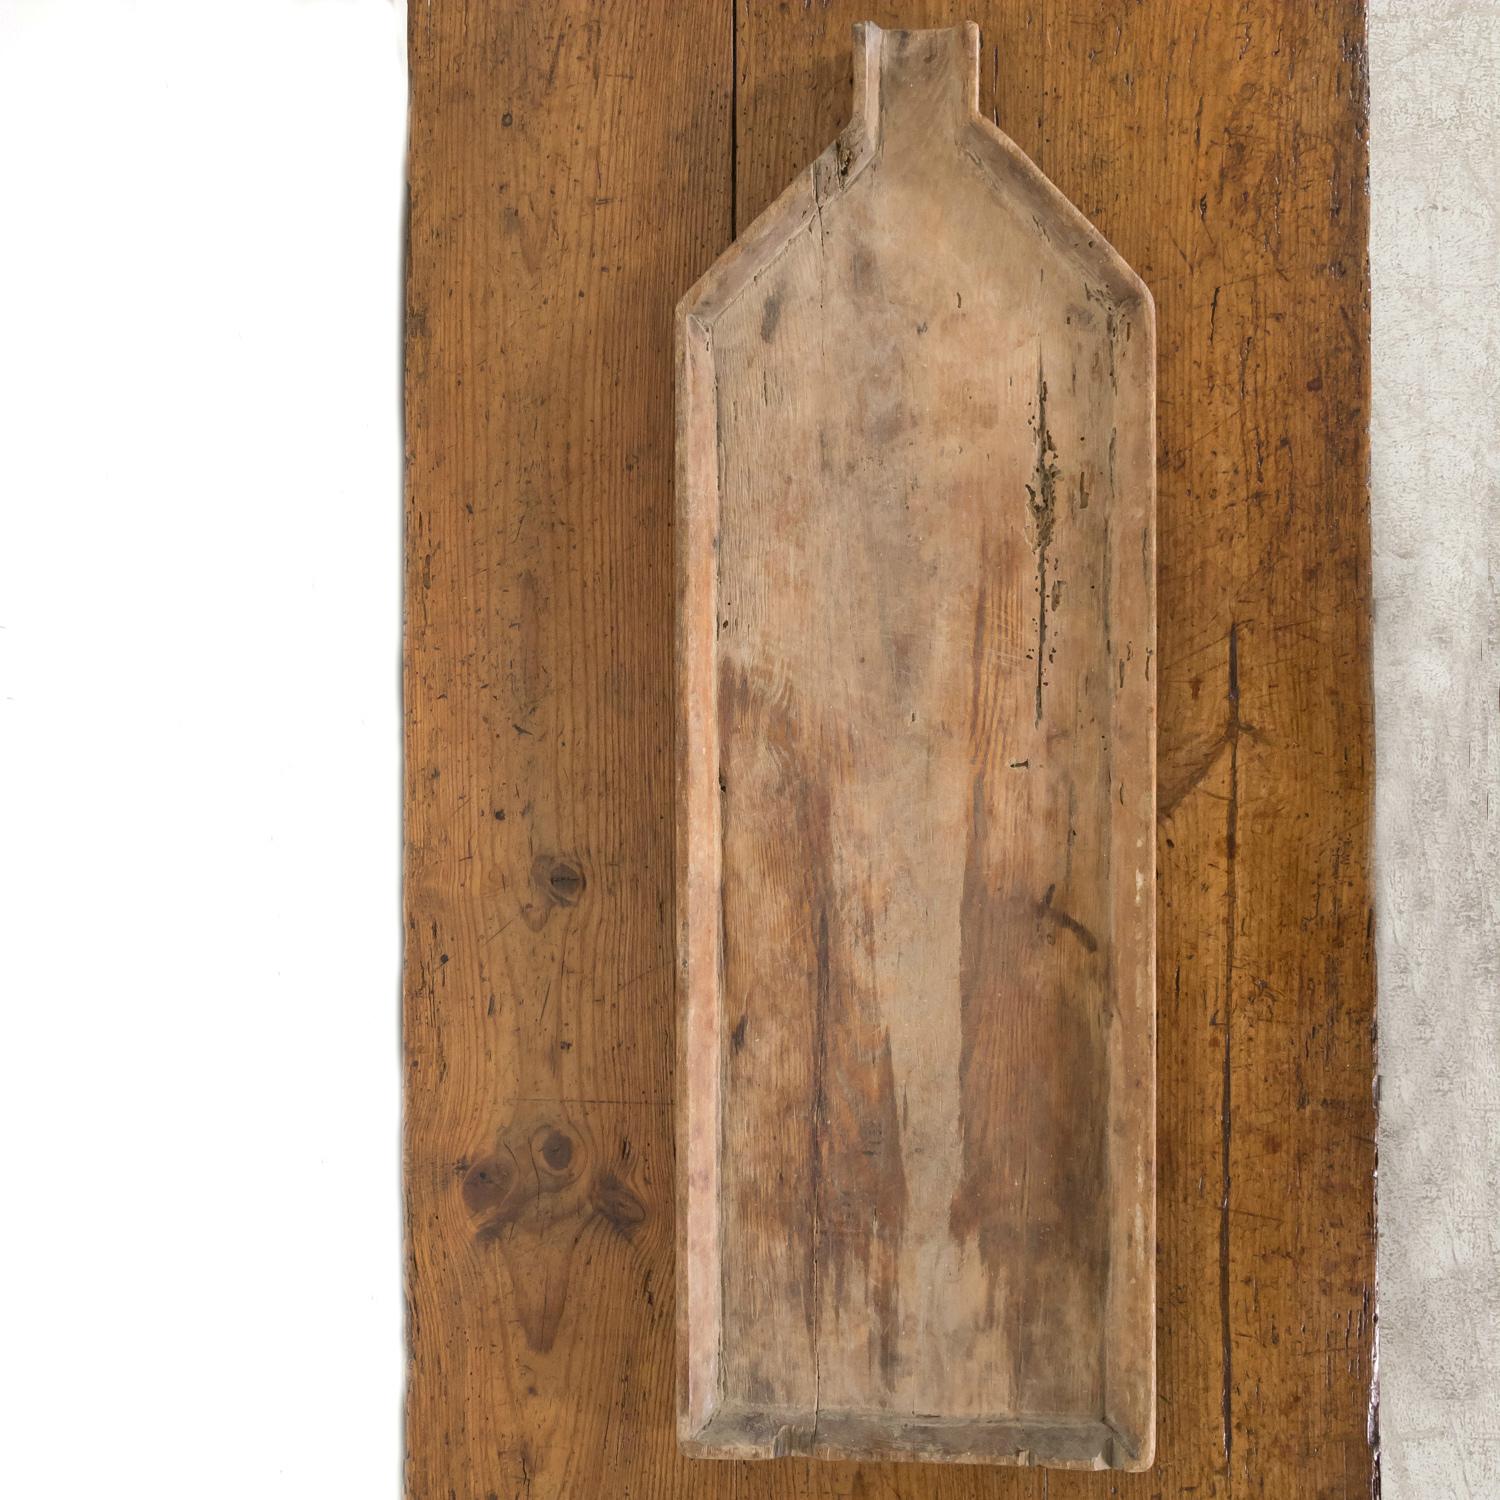 A large 19th century French cheese board from the Normandy region of France, circa 1870s. Having a timeworn patina that happens only after decades of use, this antique cheese board with raised edges was used by a cheese maker as he worked the cheese